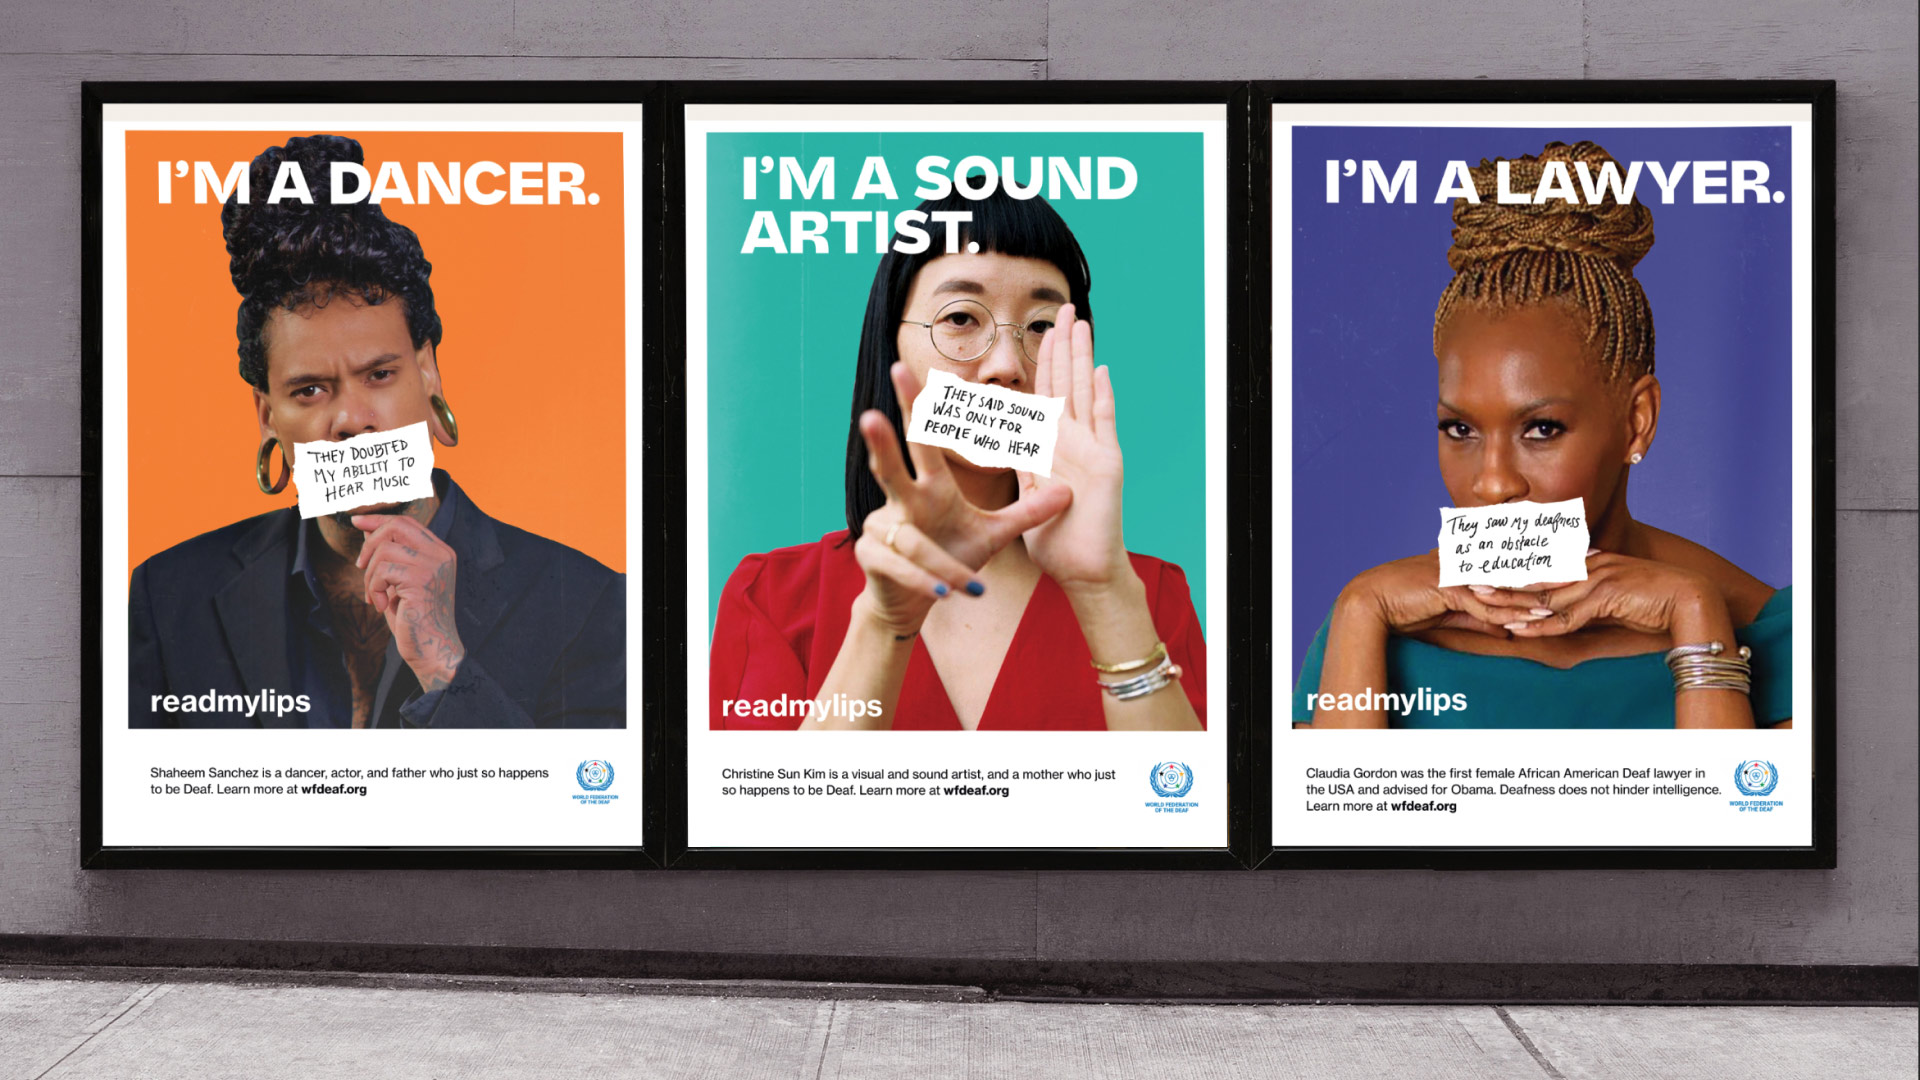 A display of 3 street ad posters with the first to the left reading “I’m a dancer,” followed by “I’m a sound artist,” and “I’m a lawyer.”